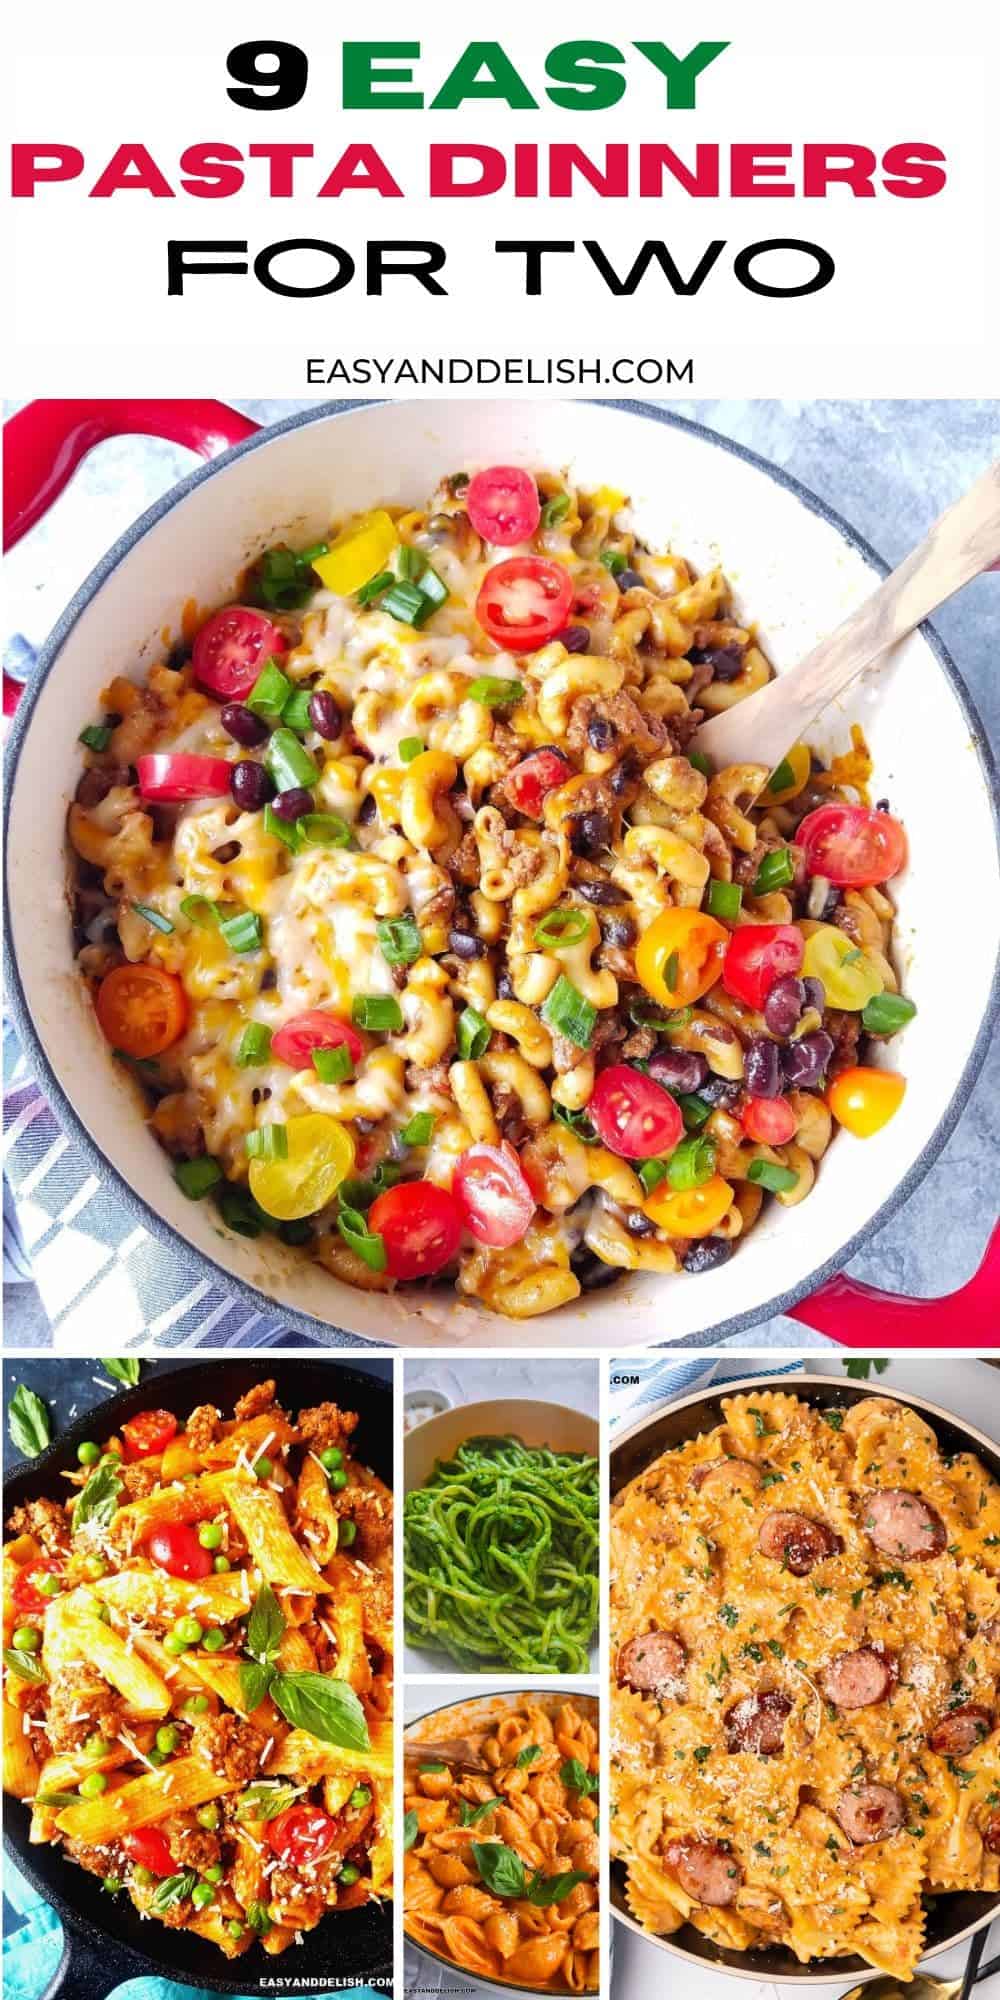 Photo collage showing 5 pasta dinners for two.